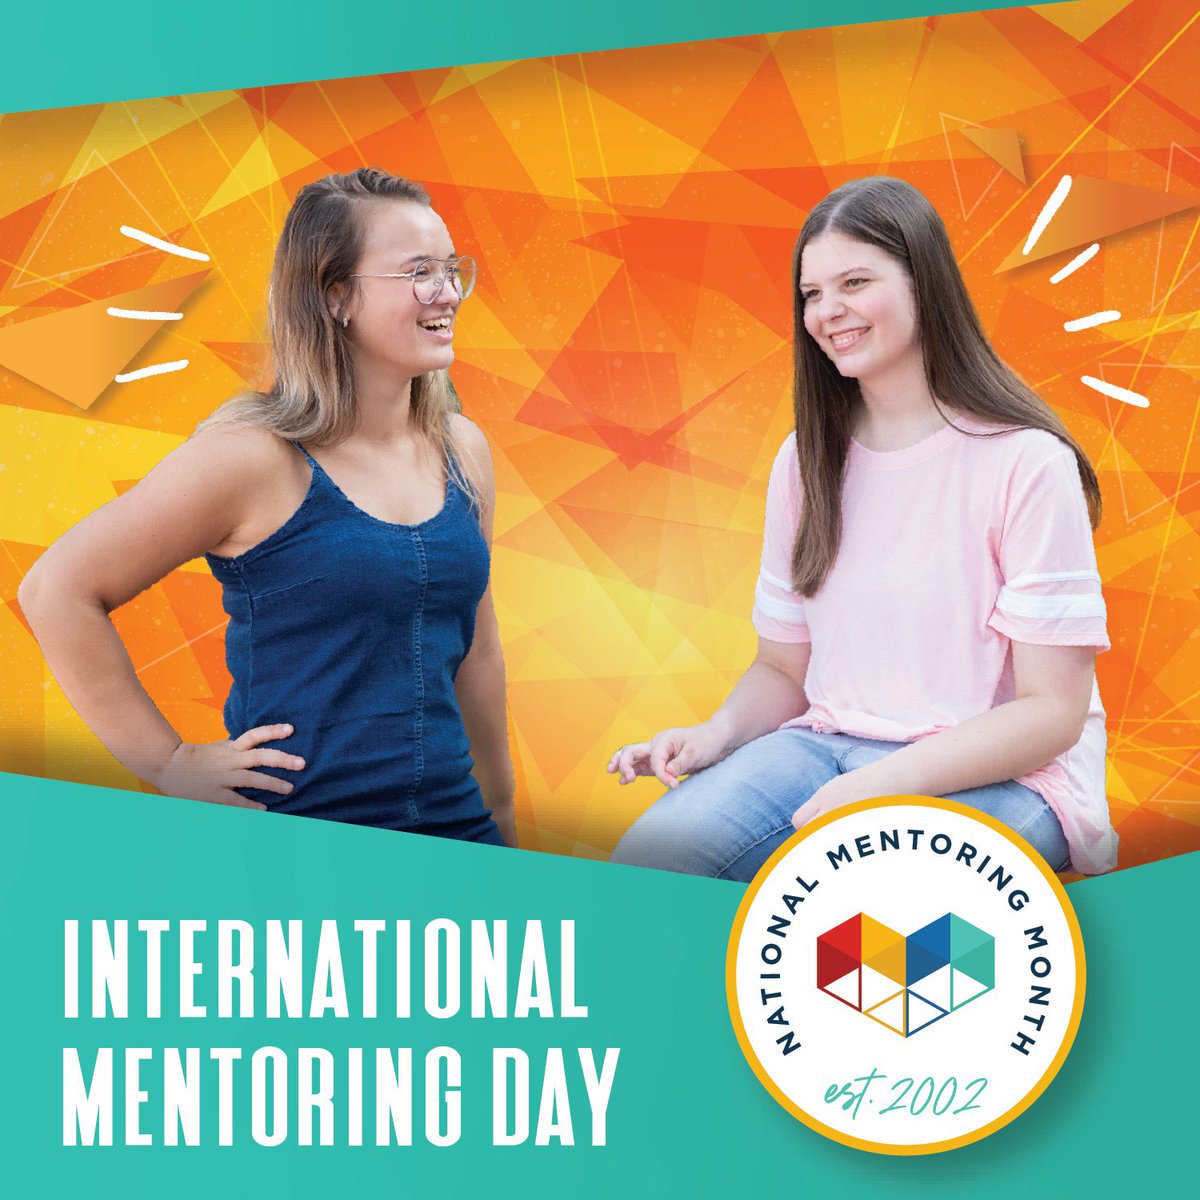 Today in honor of @muhammadali birthday, #internationalmentoringday around the world #MentoringAmplifies celebrate the power of mentoring and share your mentoring story! #MentoringMonth #AliDay @AliCenter @MENTORnational